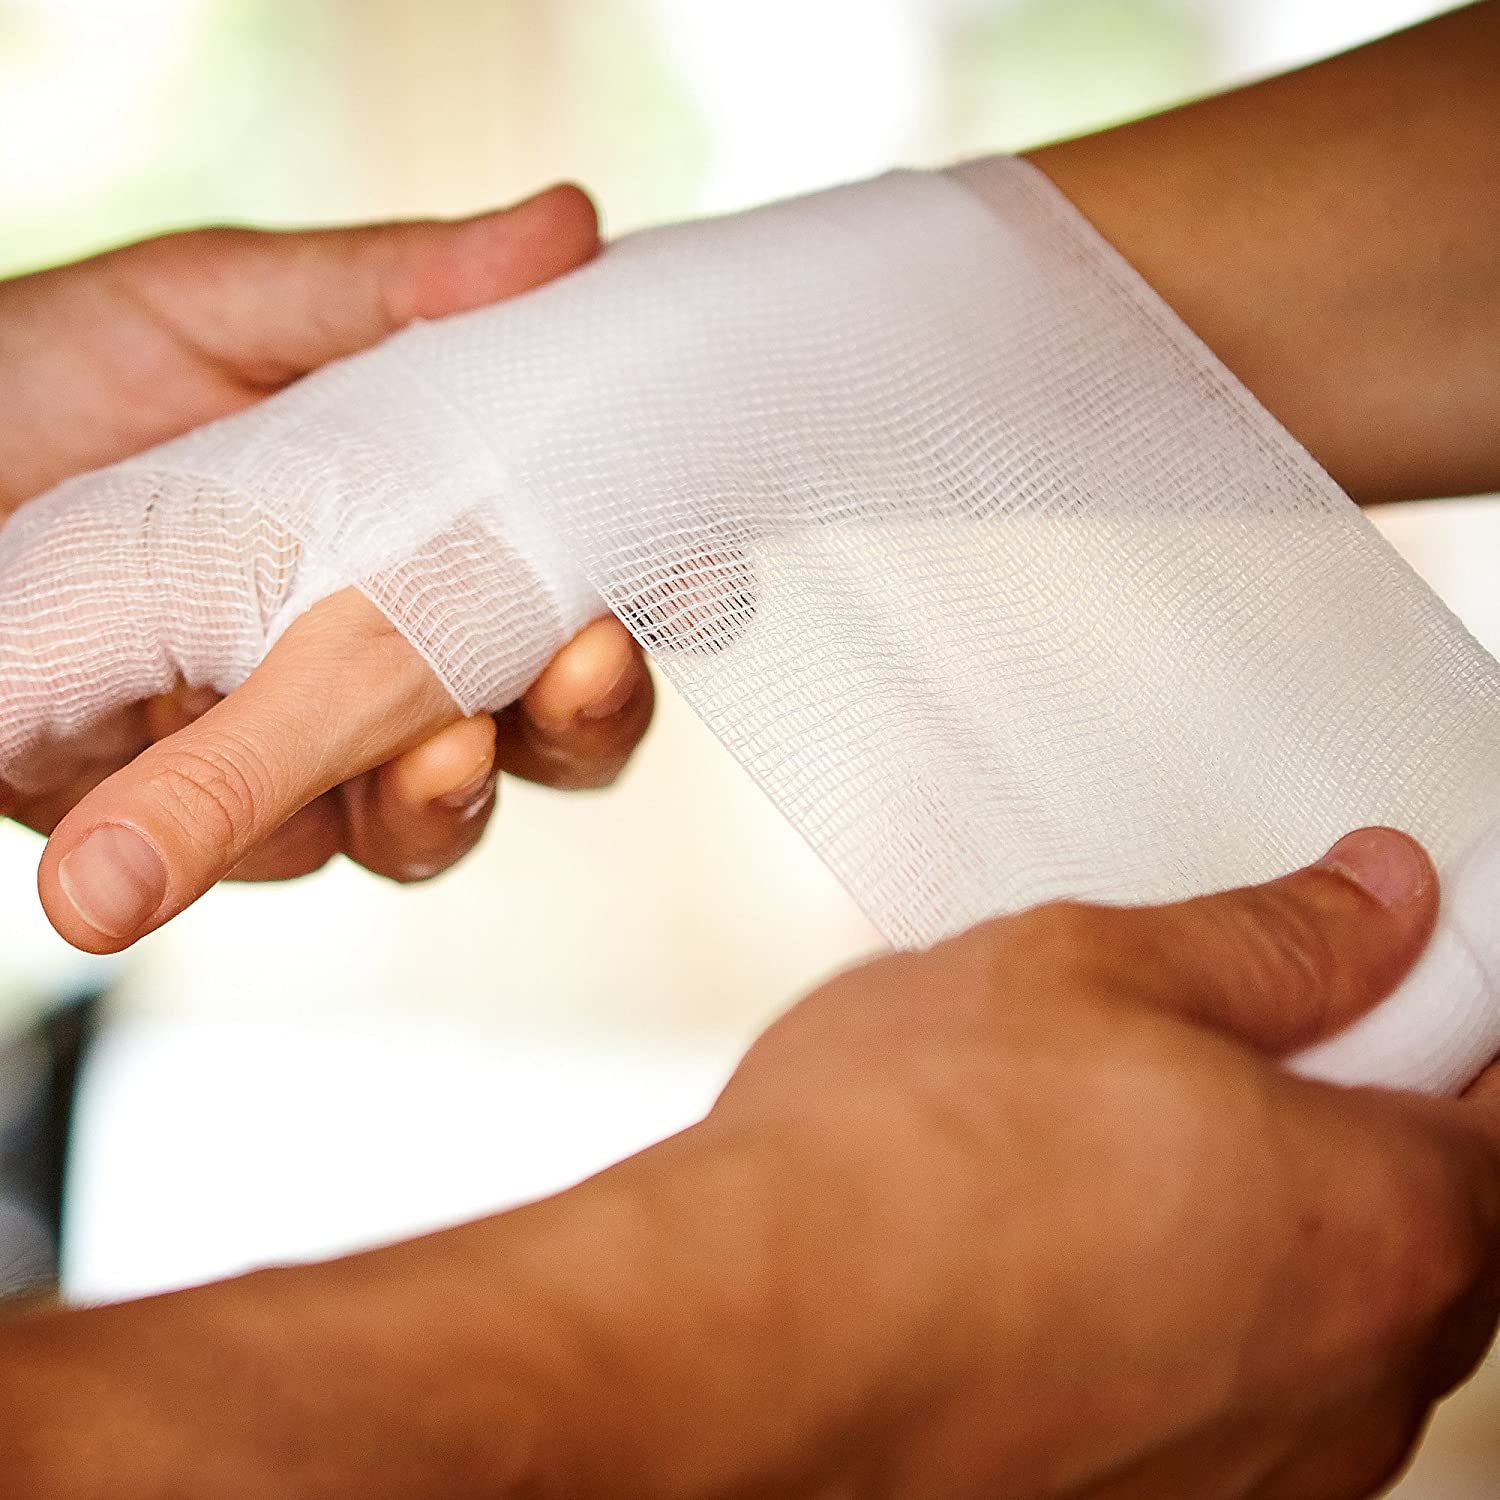 How to choose the right gauze rolls for wound healing?